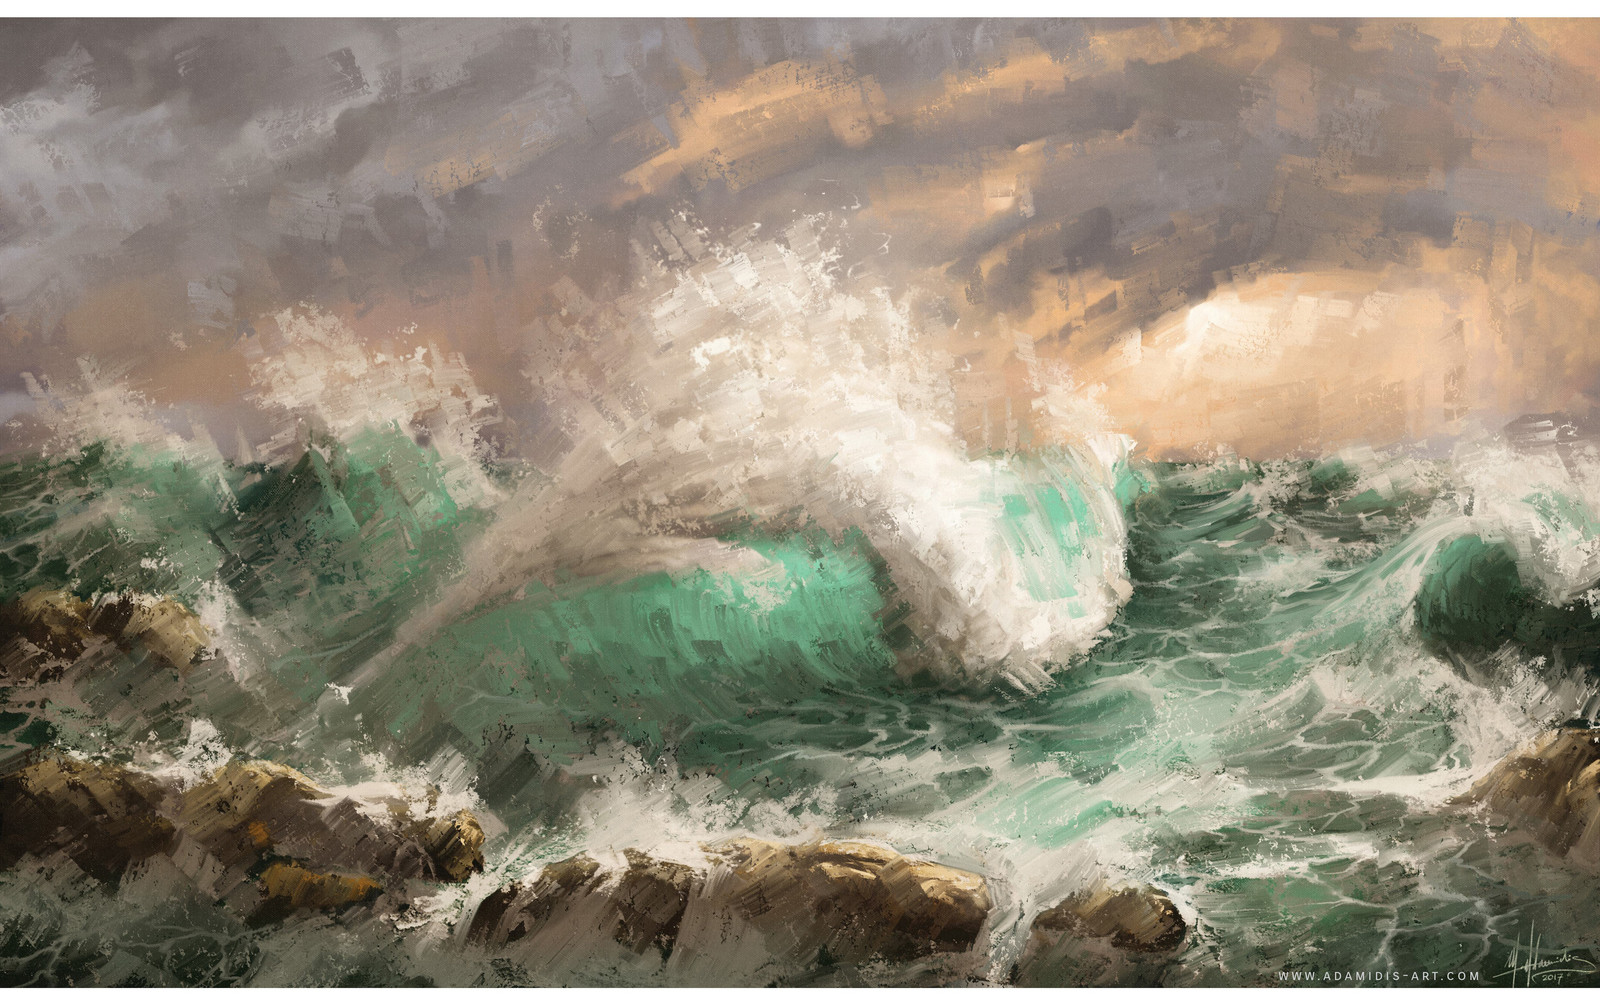 Photoshop Digital Oil Painting - Shaping the Sea Waves (c)2018